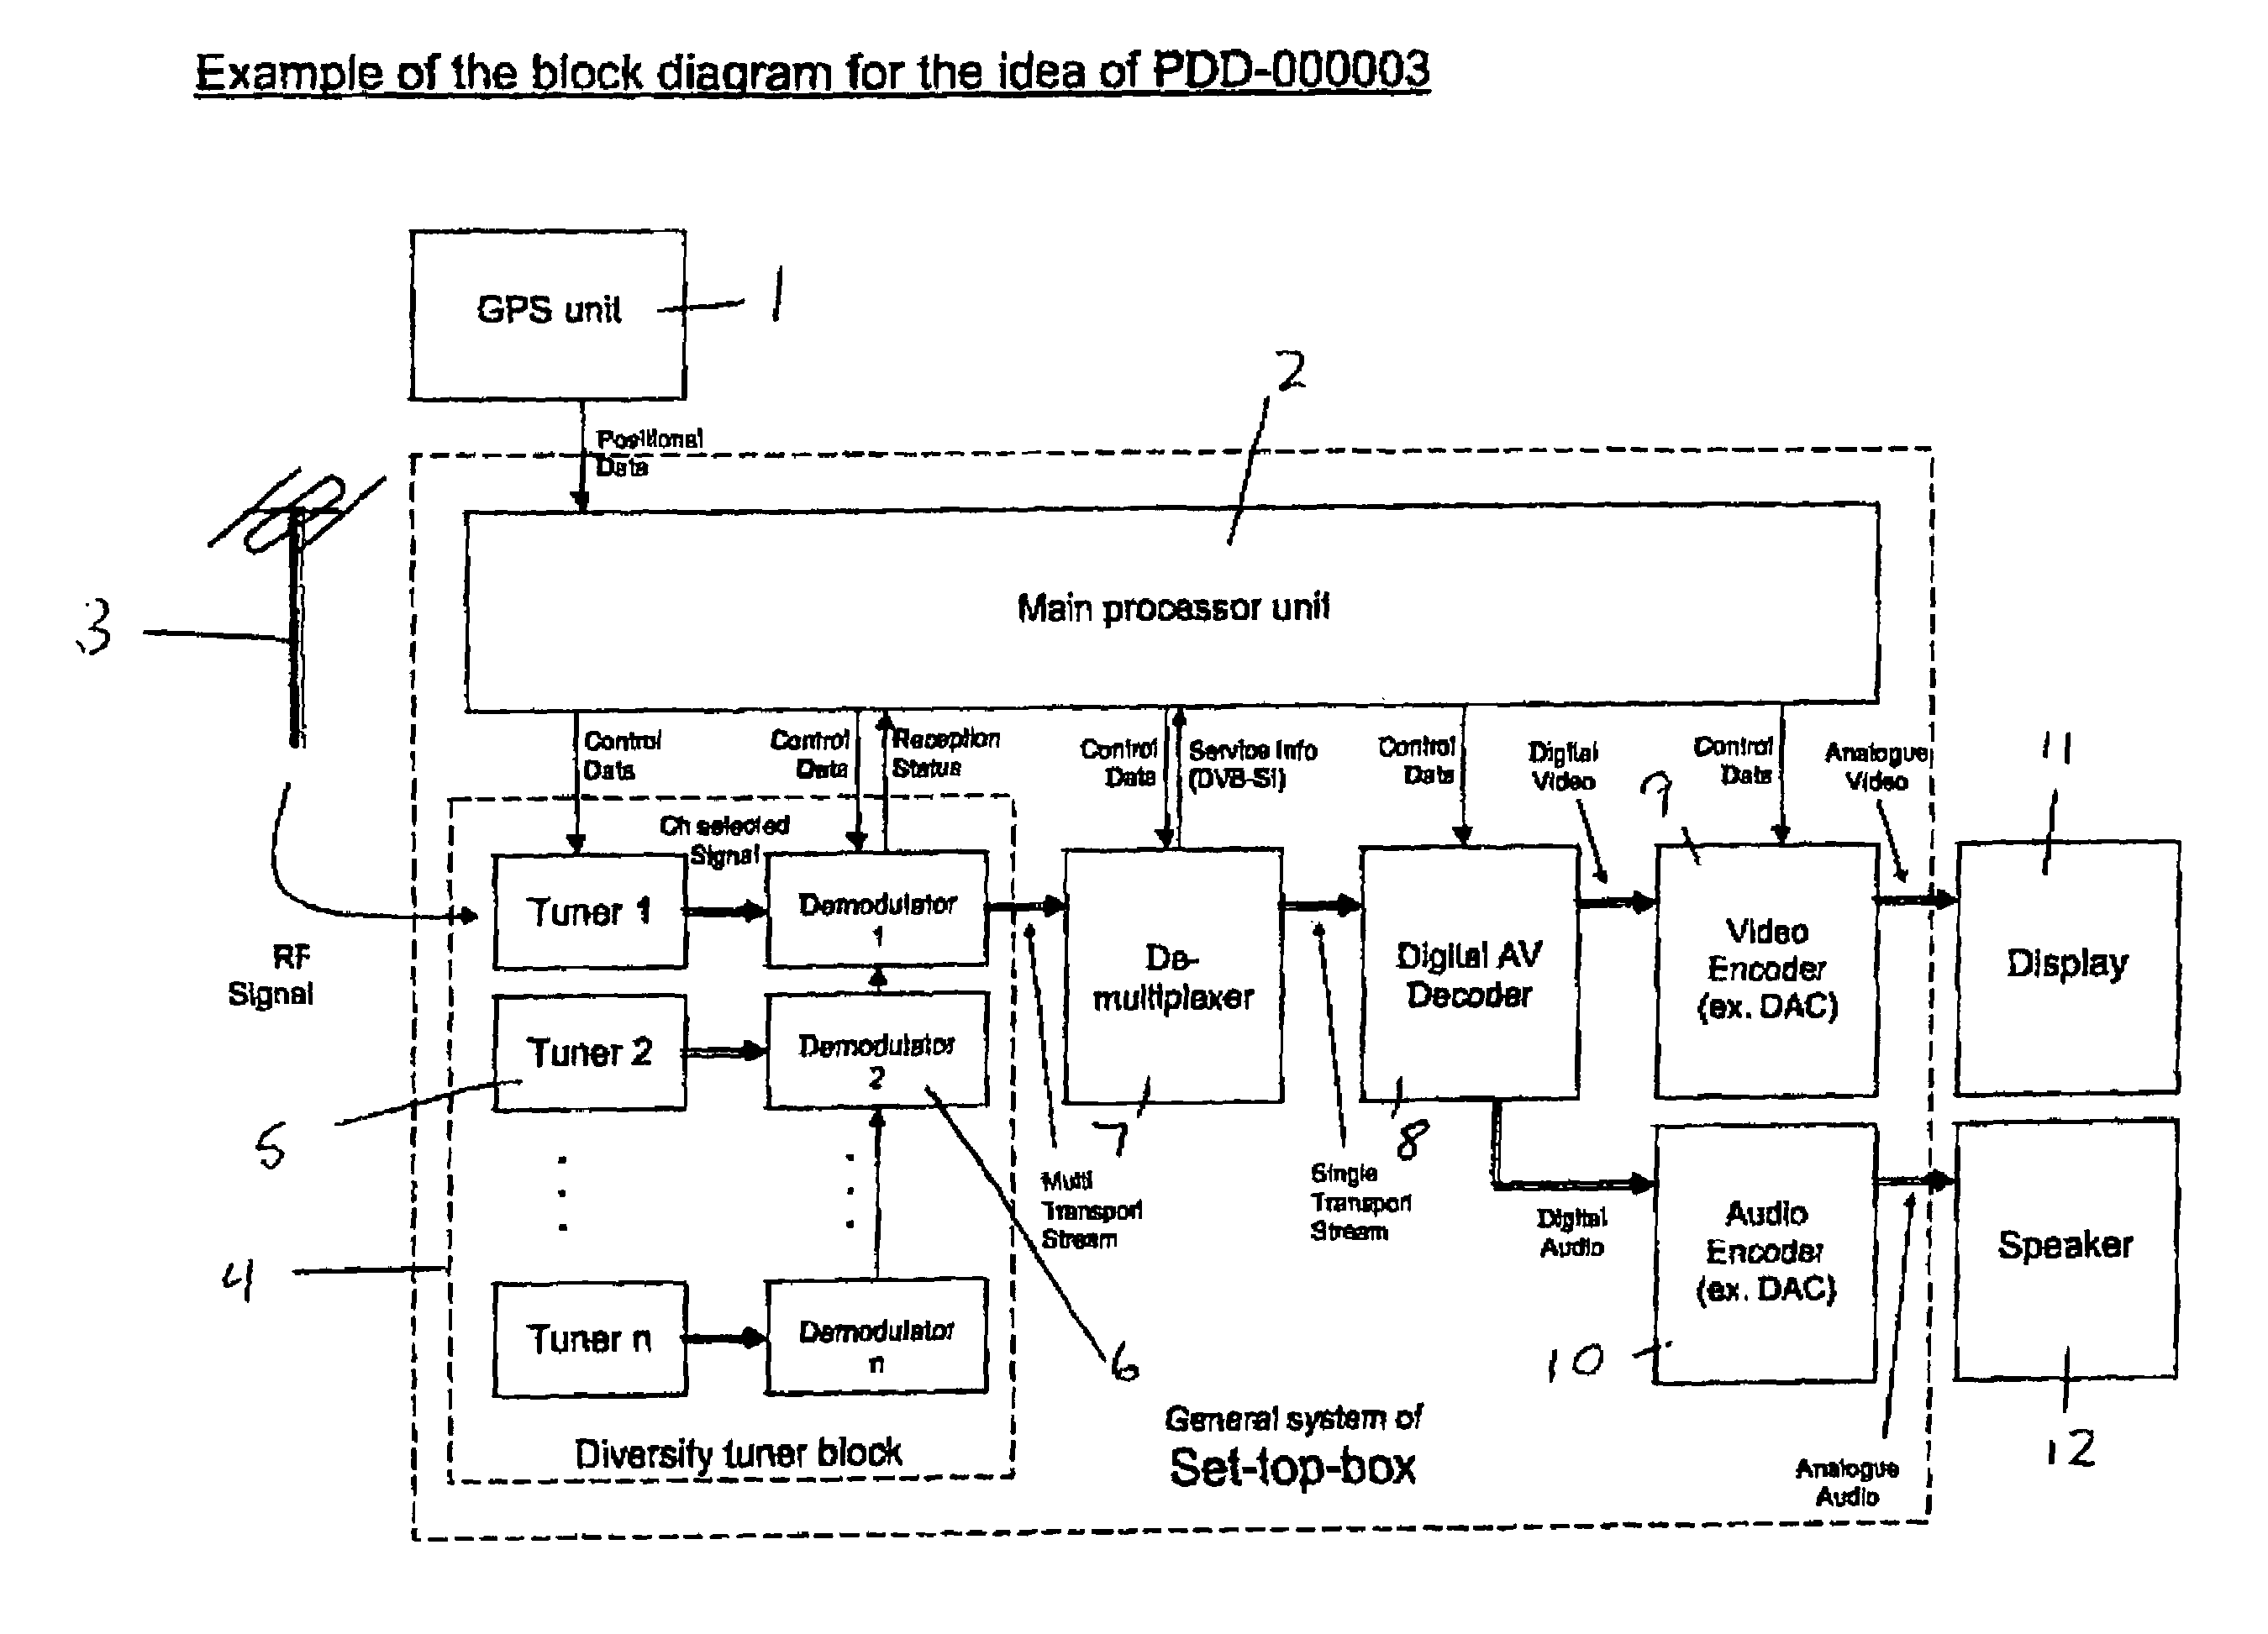 Automatic tuning system for a mobile DVB-T receiver